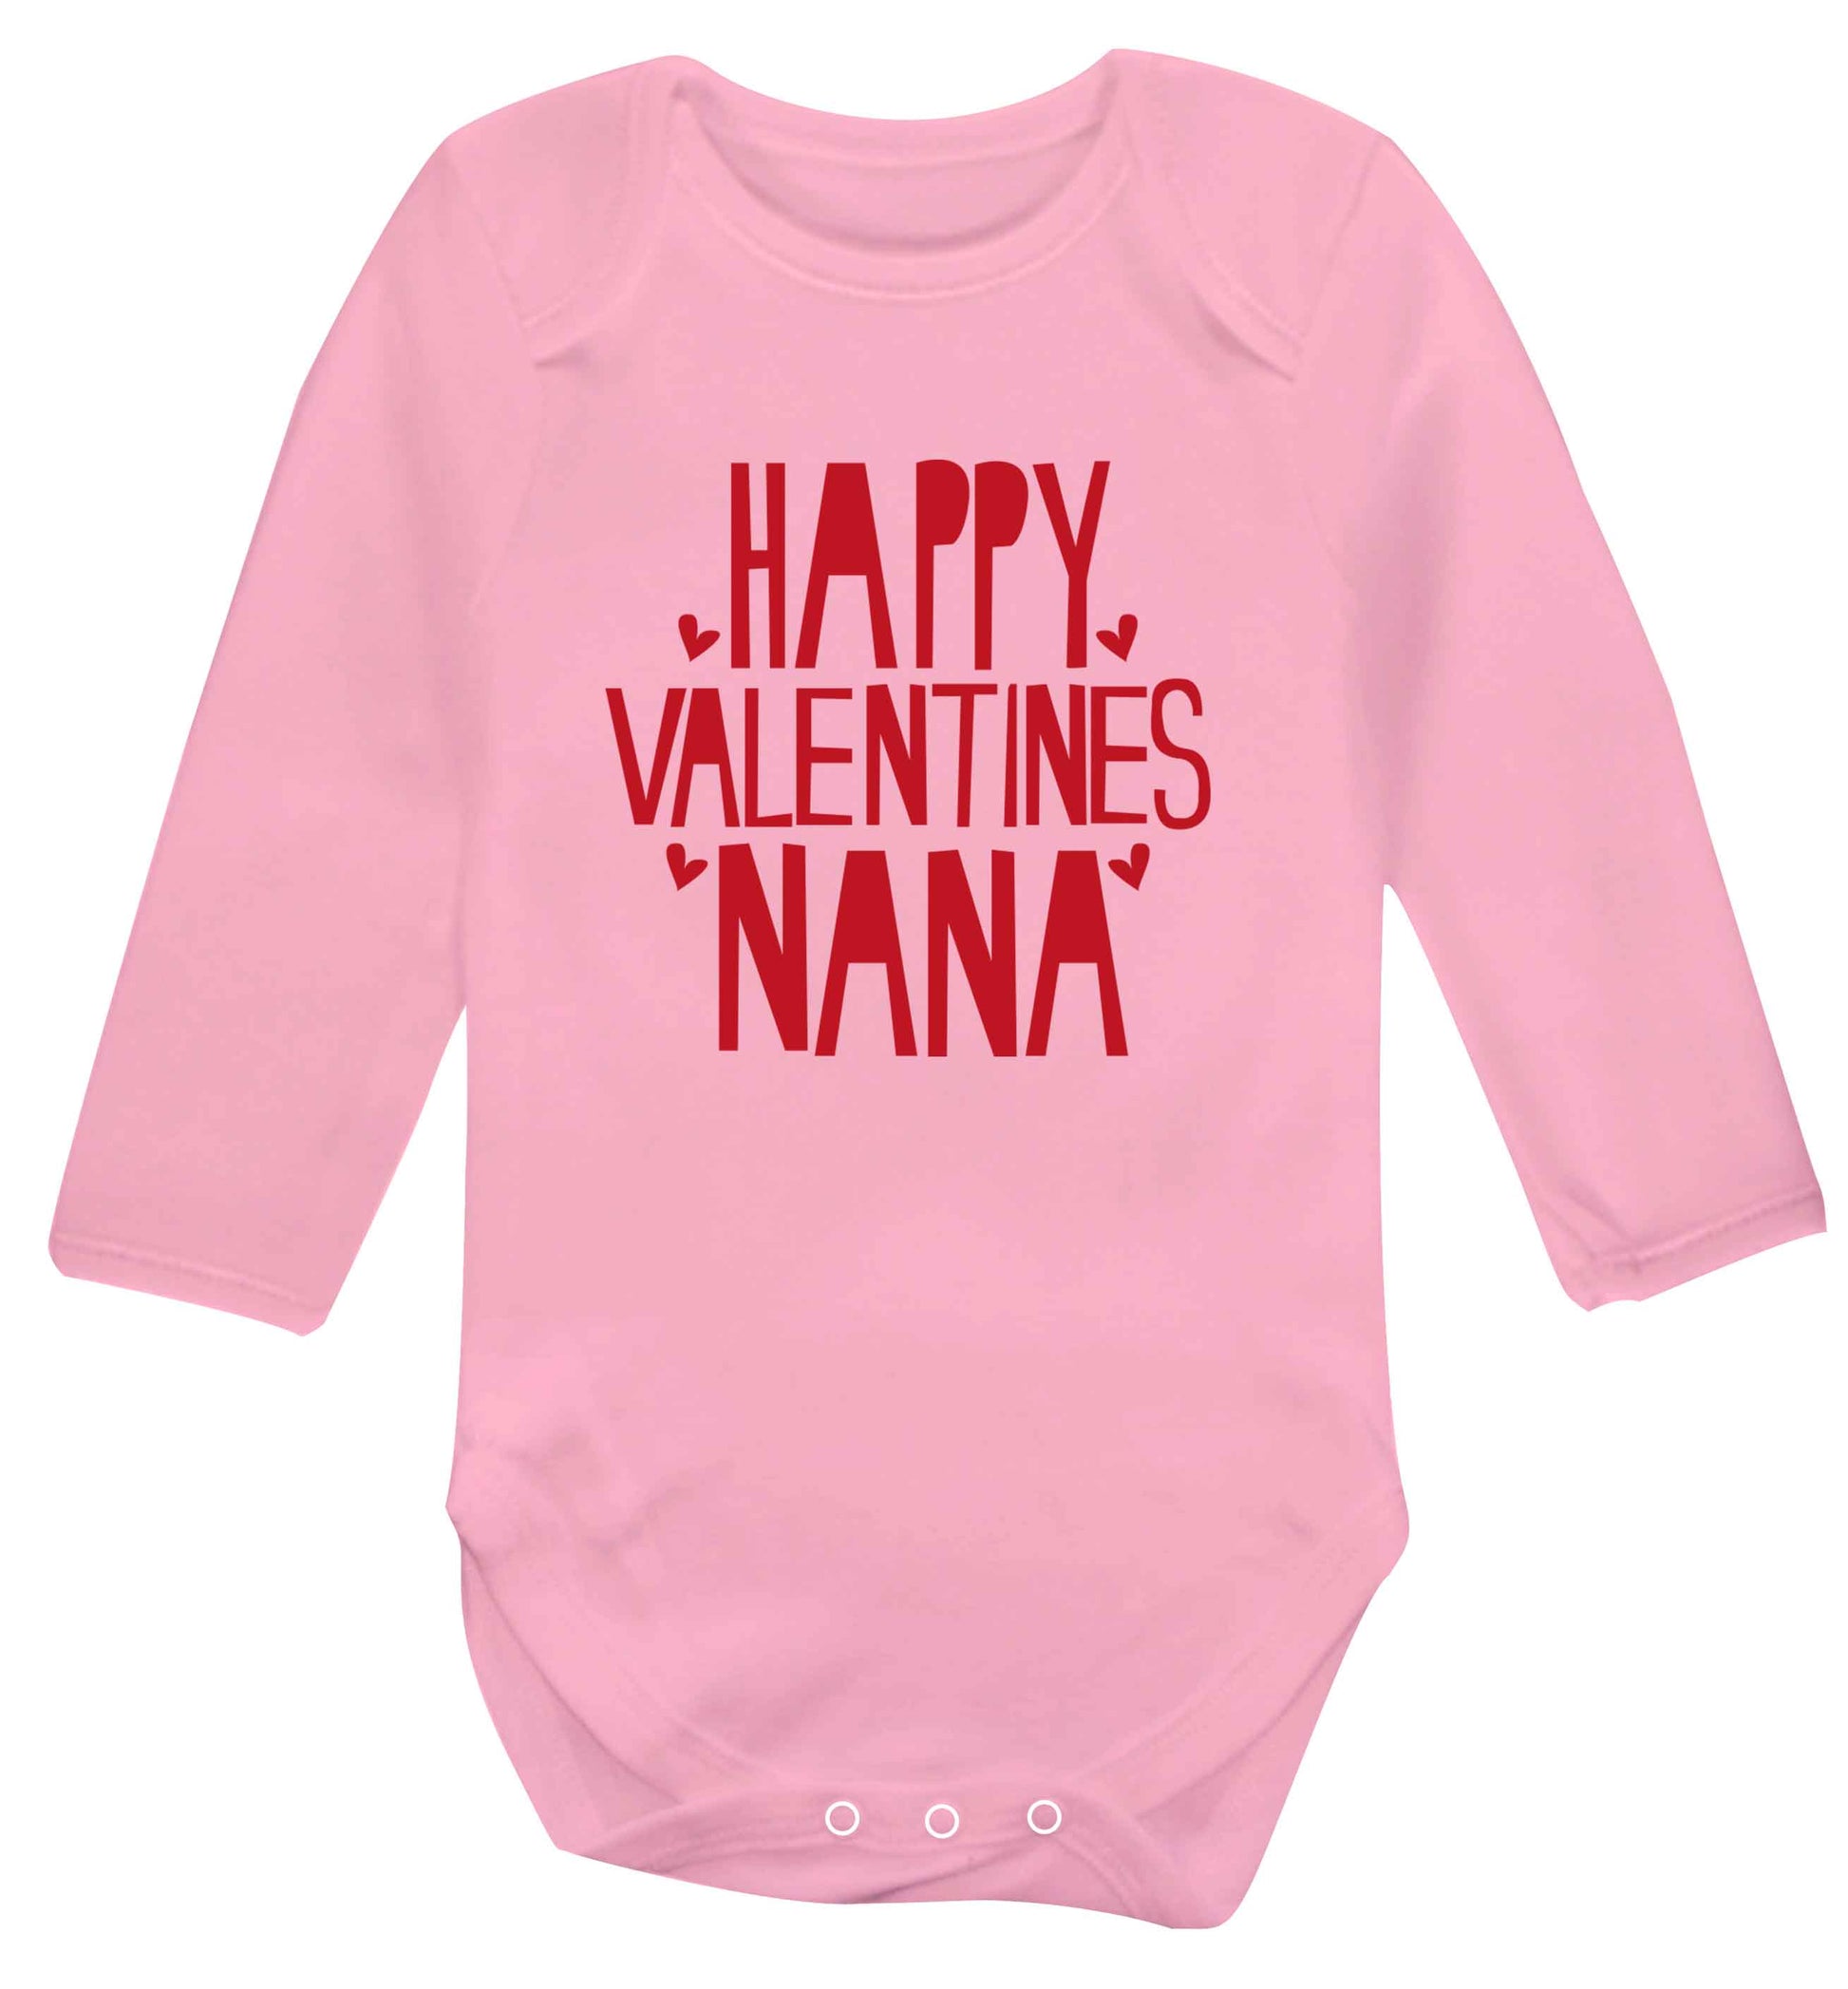 Happy valentines nana baby vest long sleeved pale pink 6-12 months